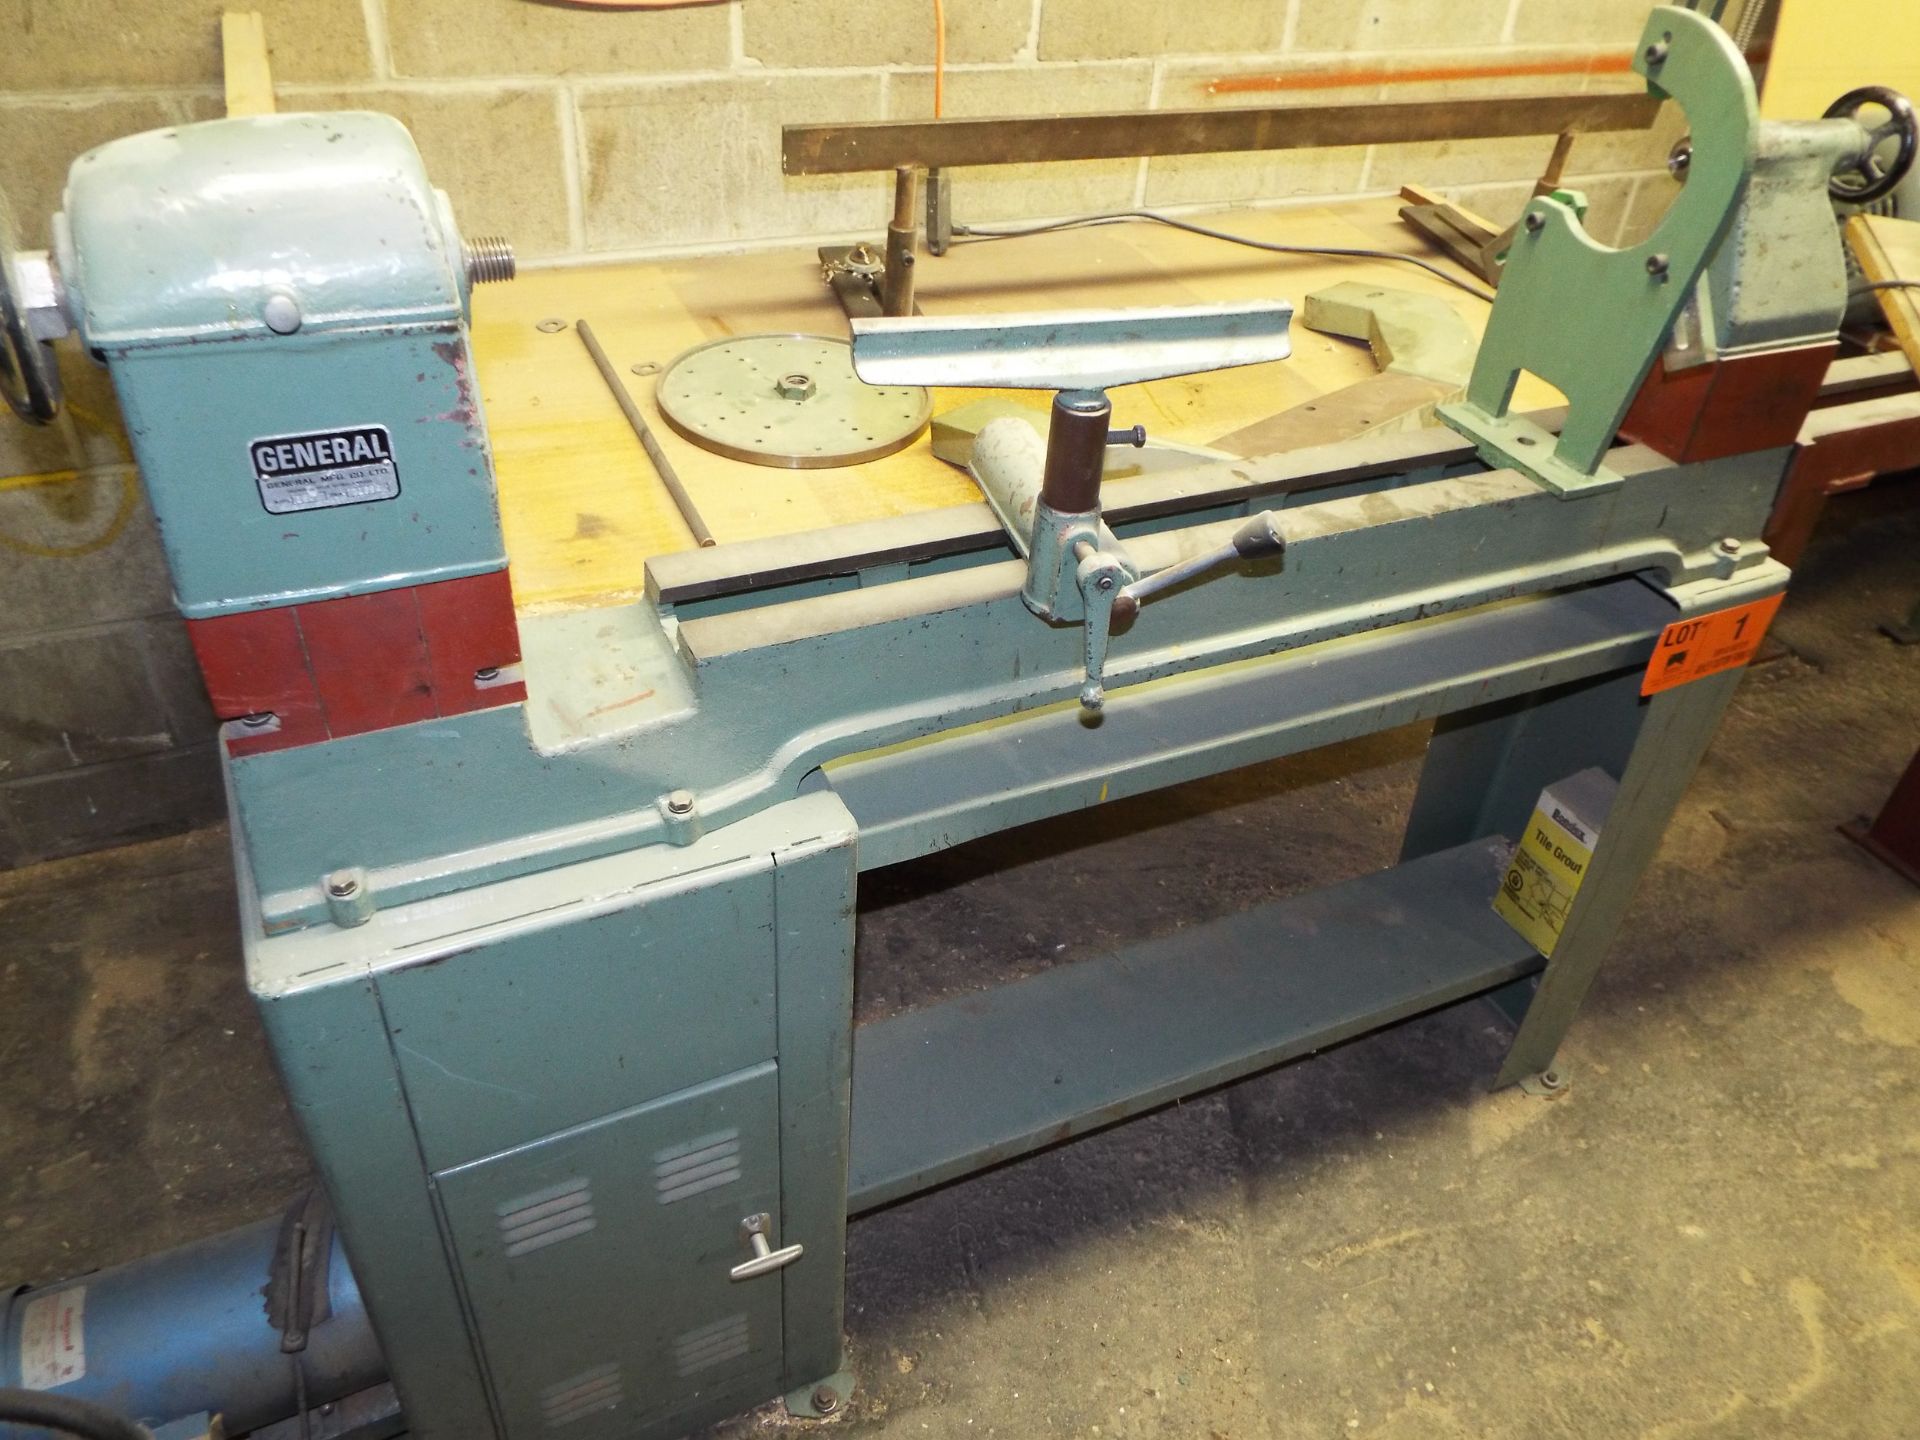 GENERAL 160 CONVENTIONAL WOOD TURNING LATHE WITH SECO BRONCO II VARIABLE SPEED CONTROL, 1.5 HP, - Image 2 of 2